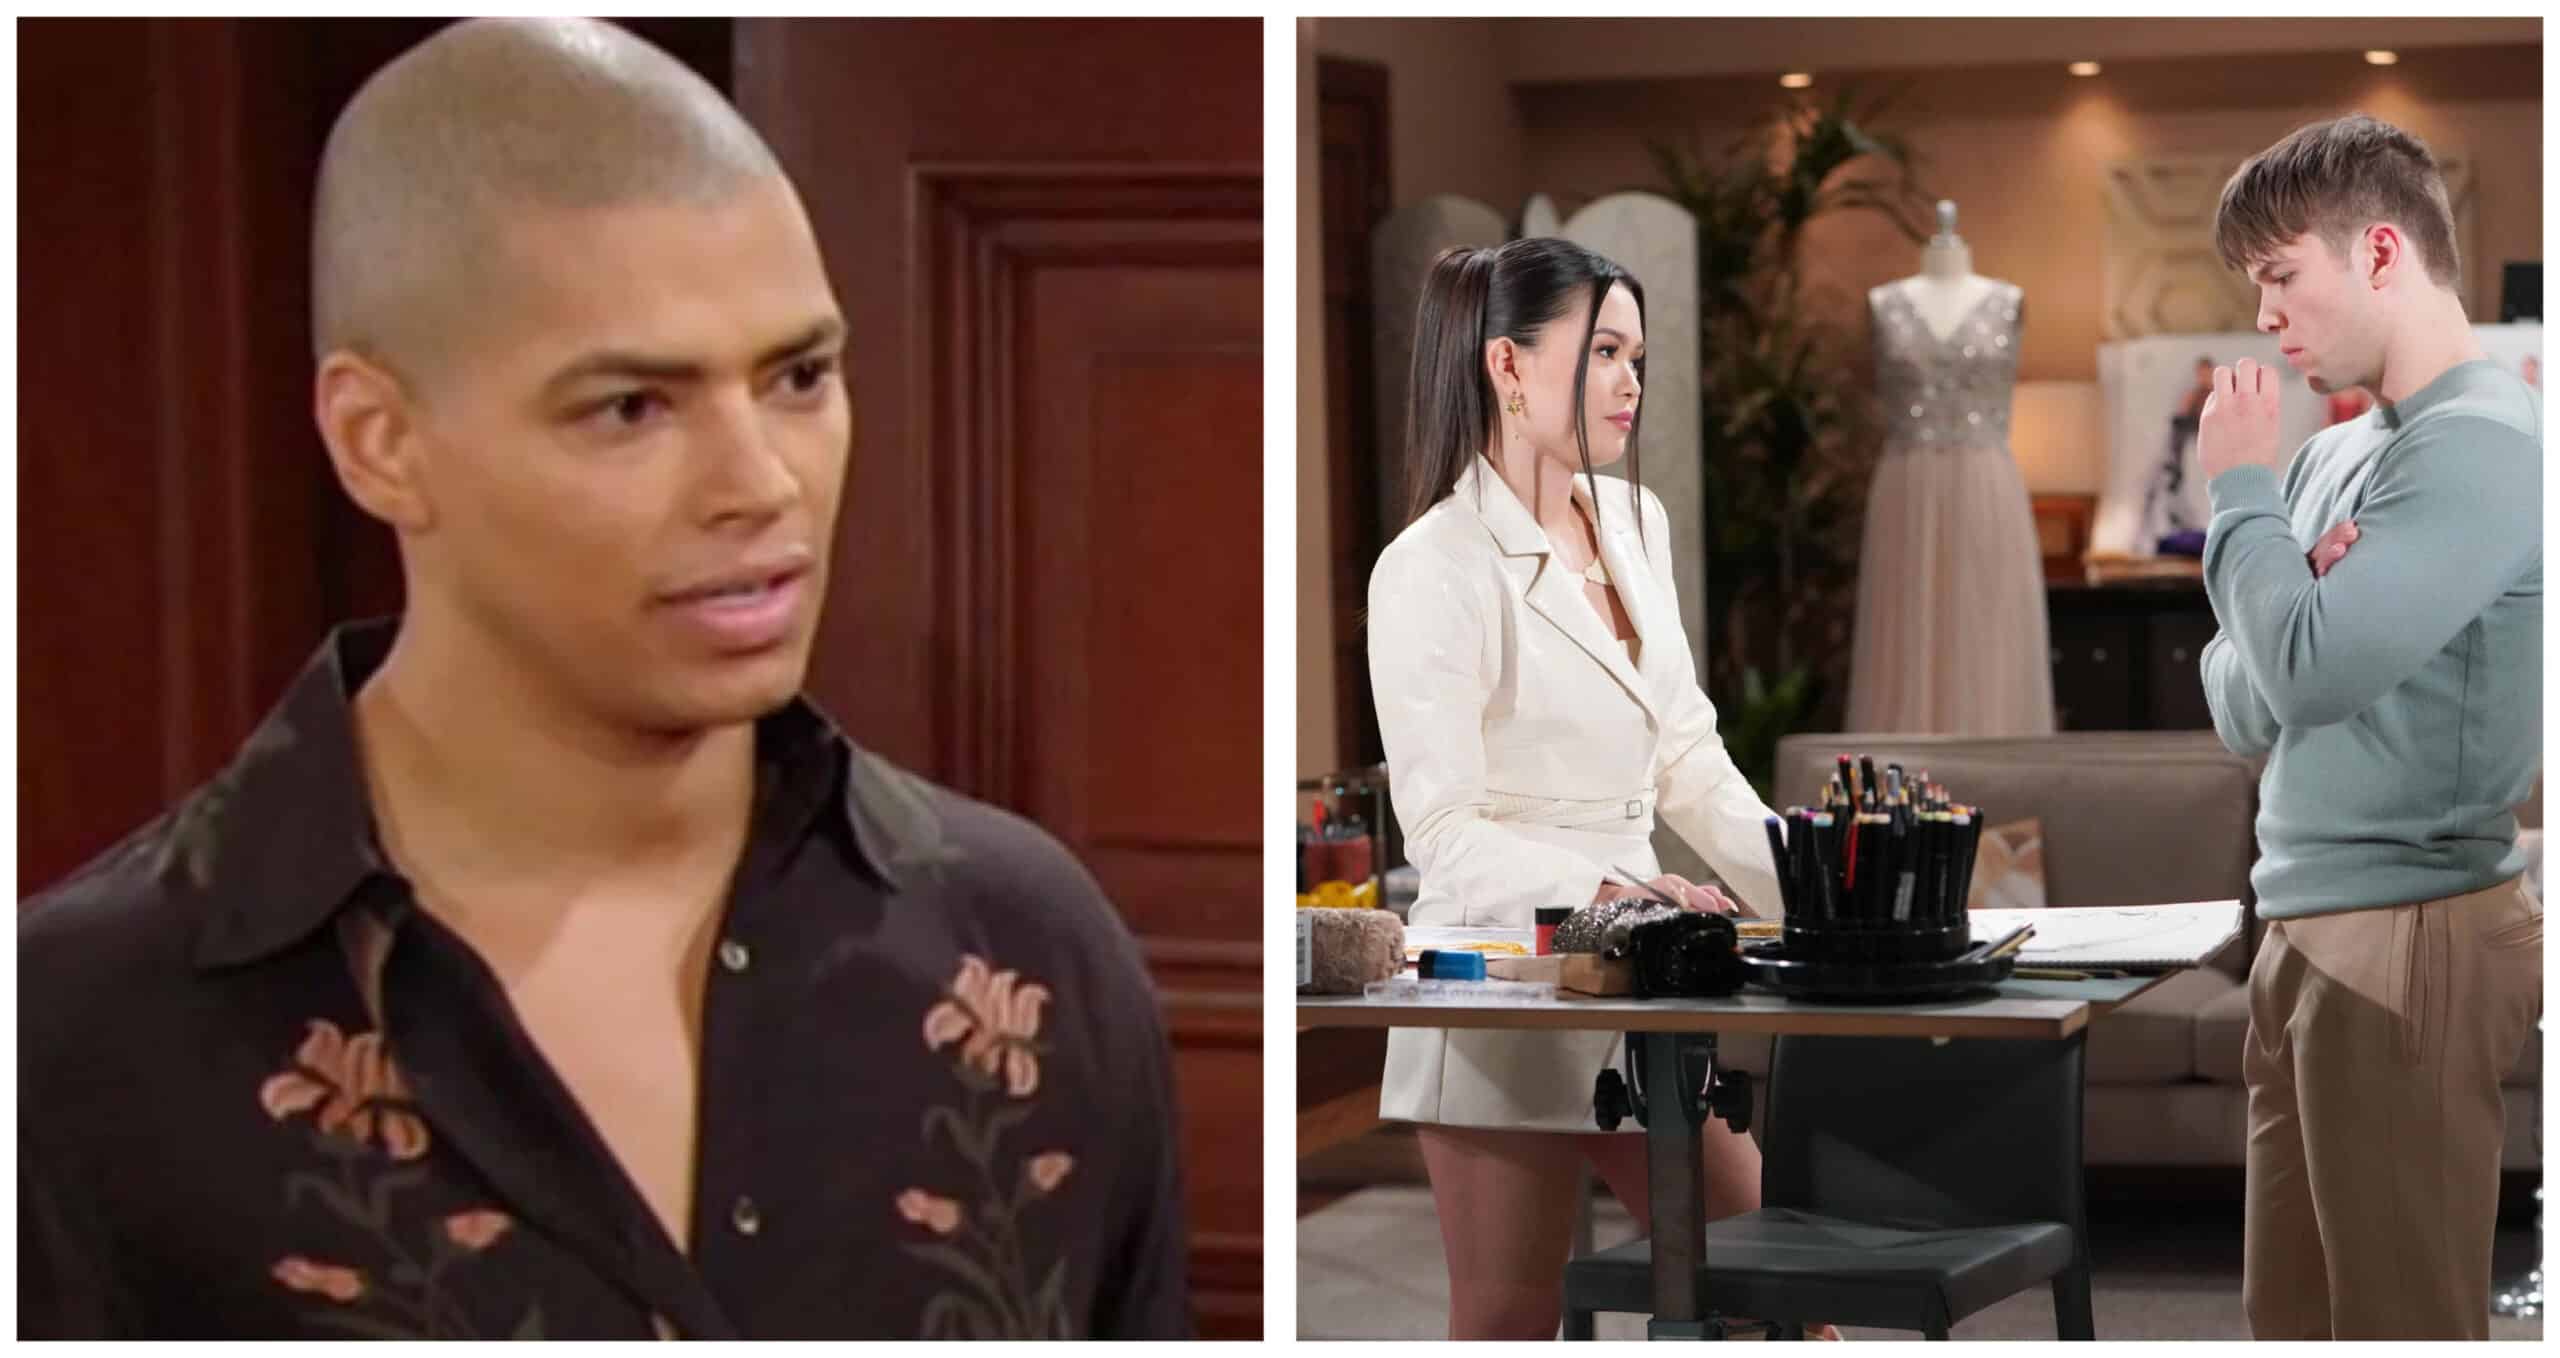 The Bold and the Beautiful spoilers RJ Forrester Zende Forrester Dominguez Luna in Love Triangle 1